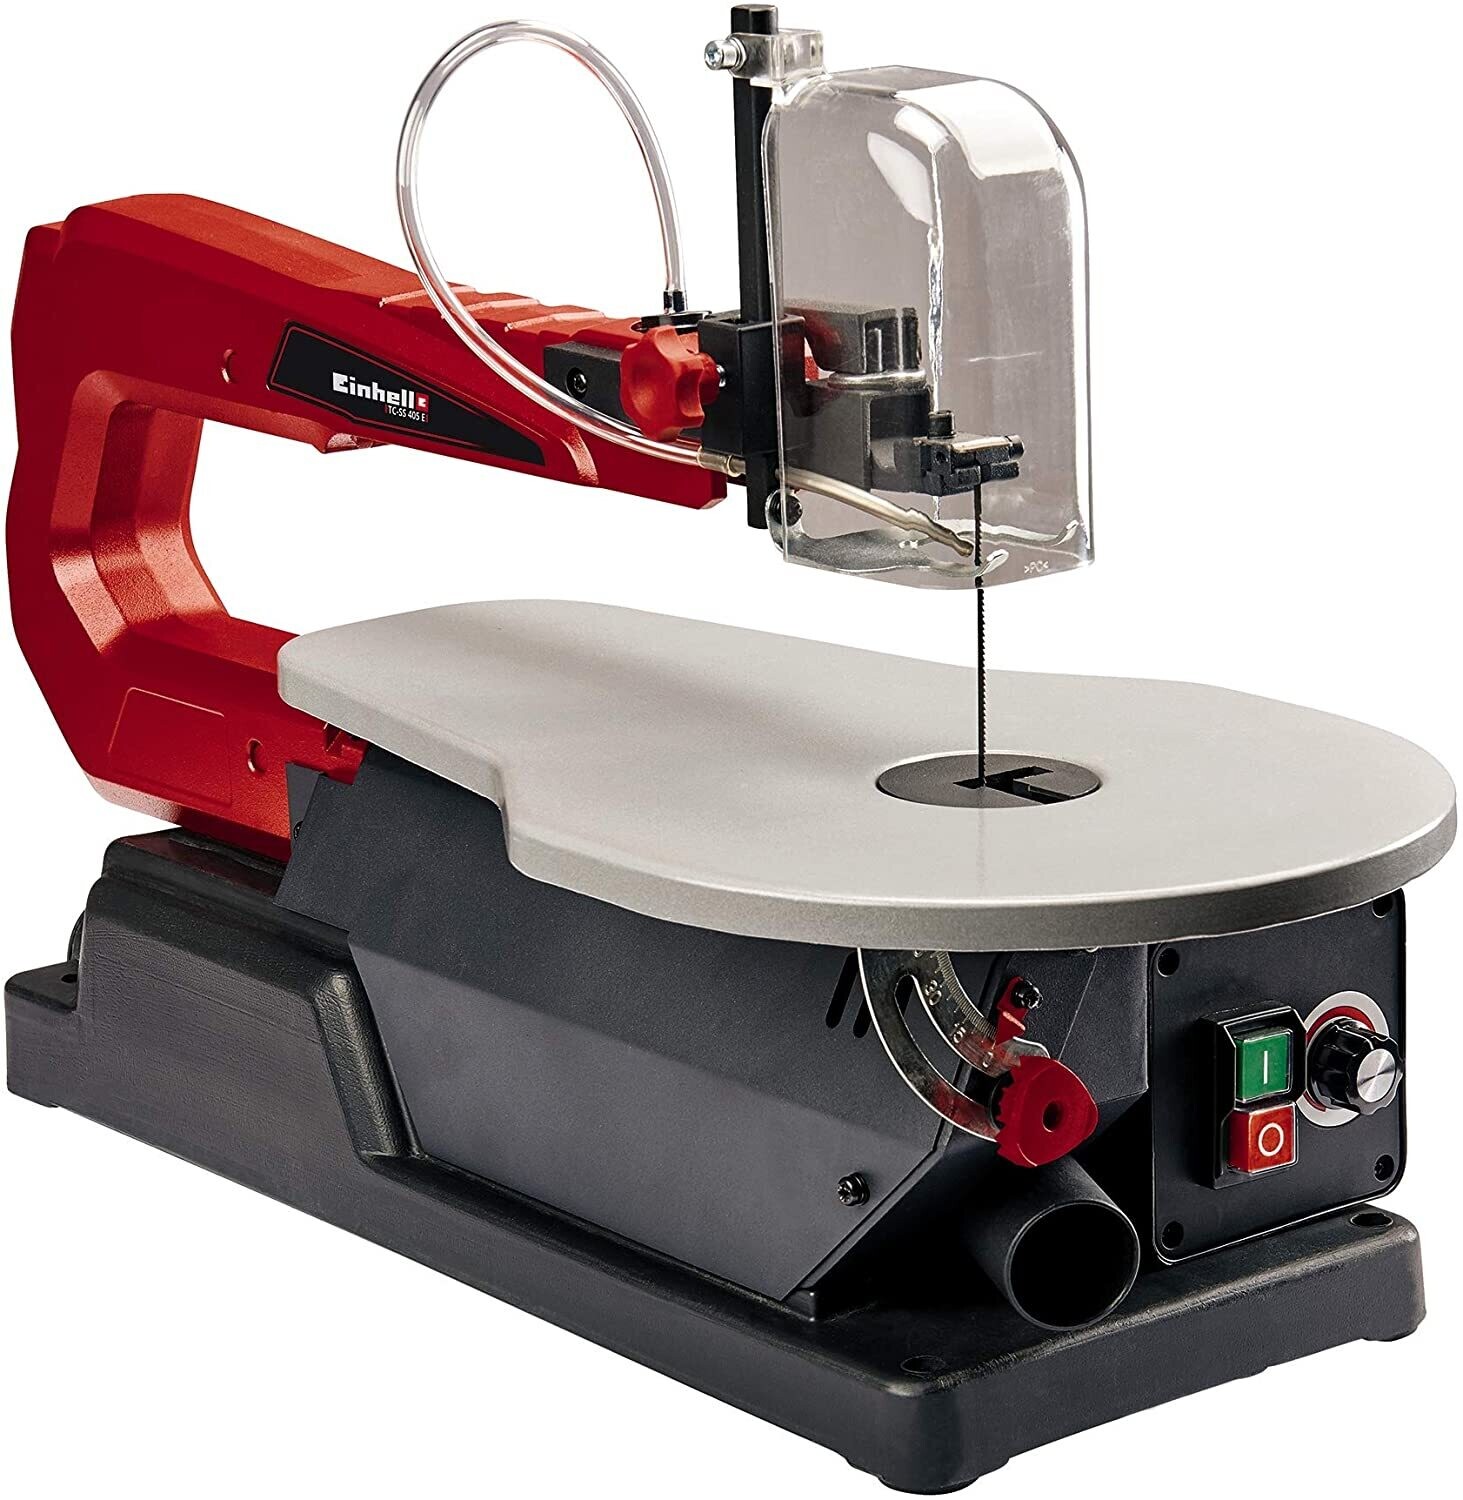 Electric Scroll Saw With Dust Extraction For Woodworking, Crafting, and DIY